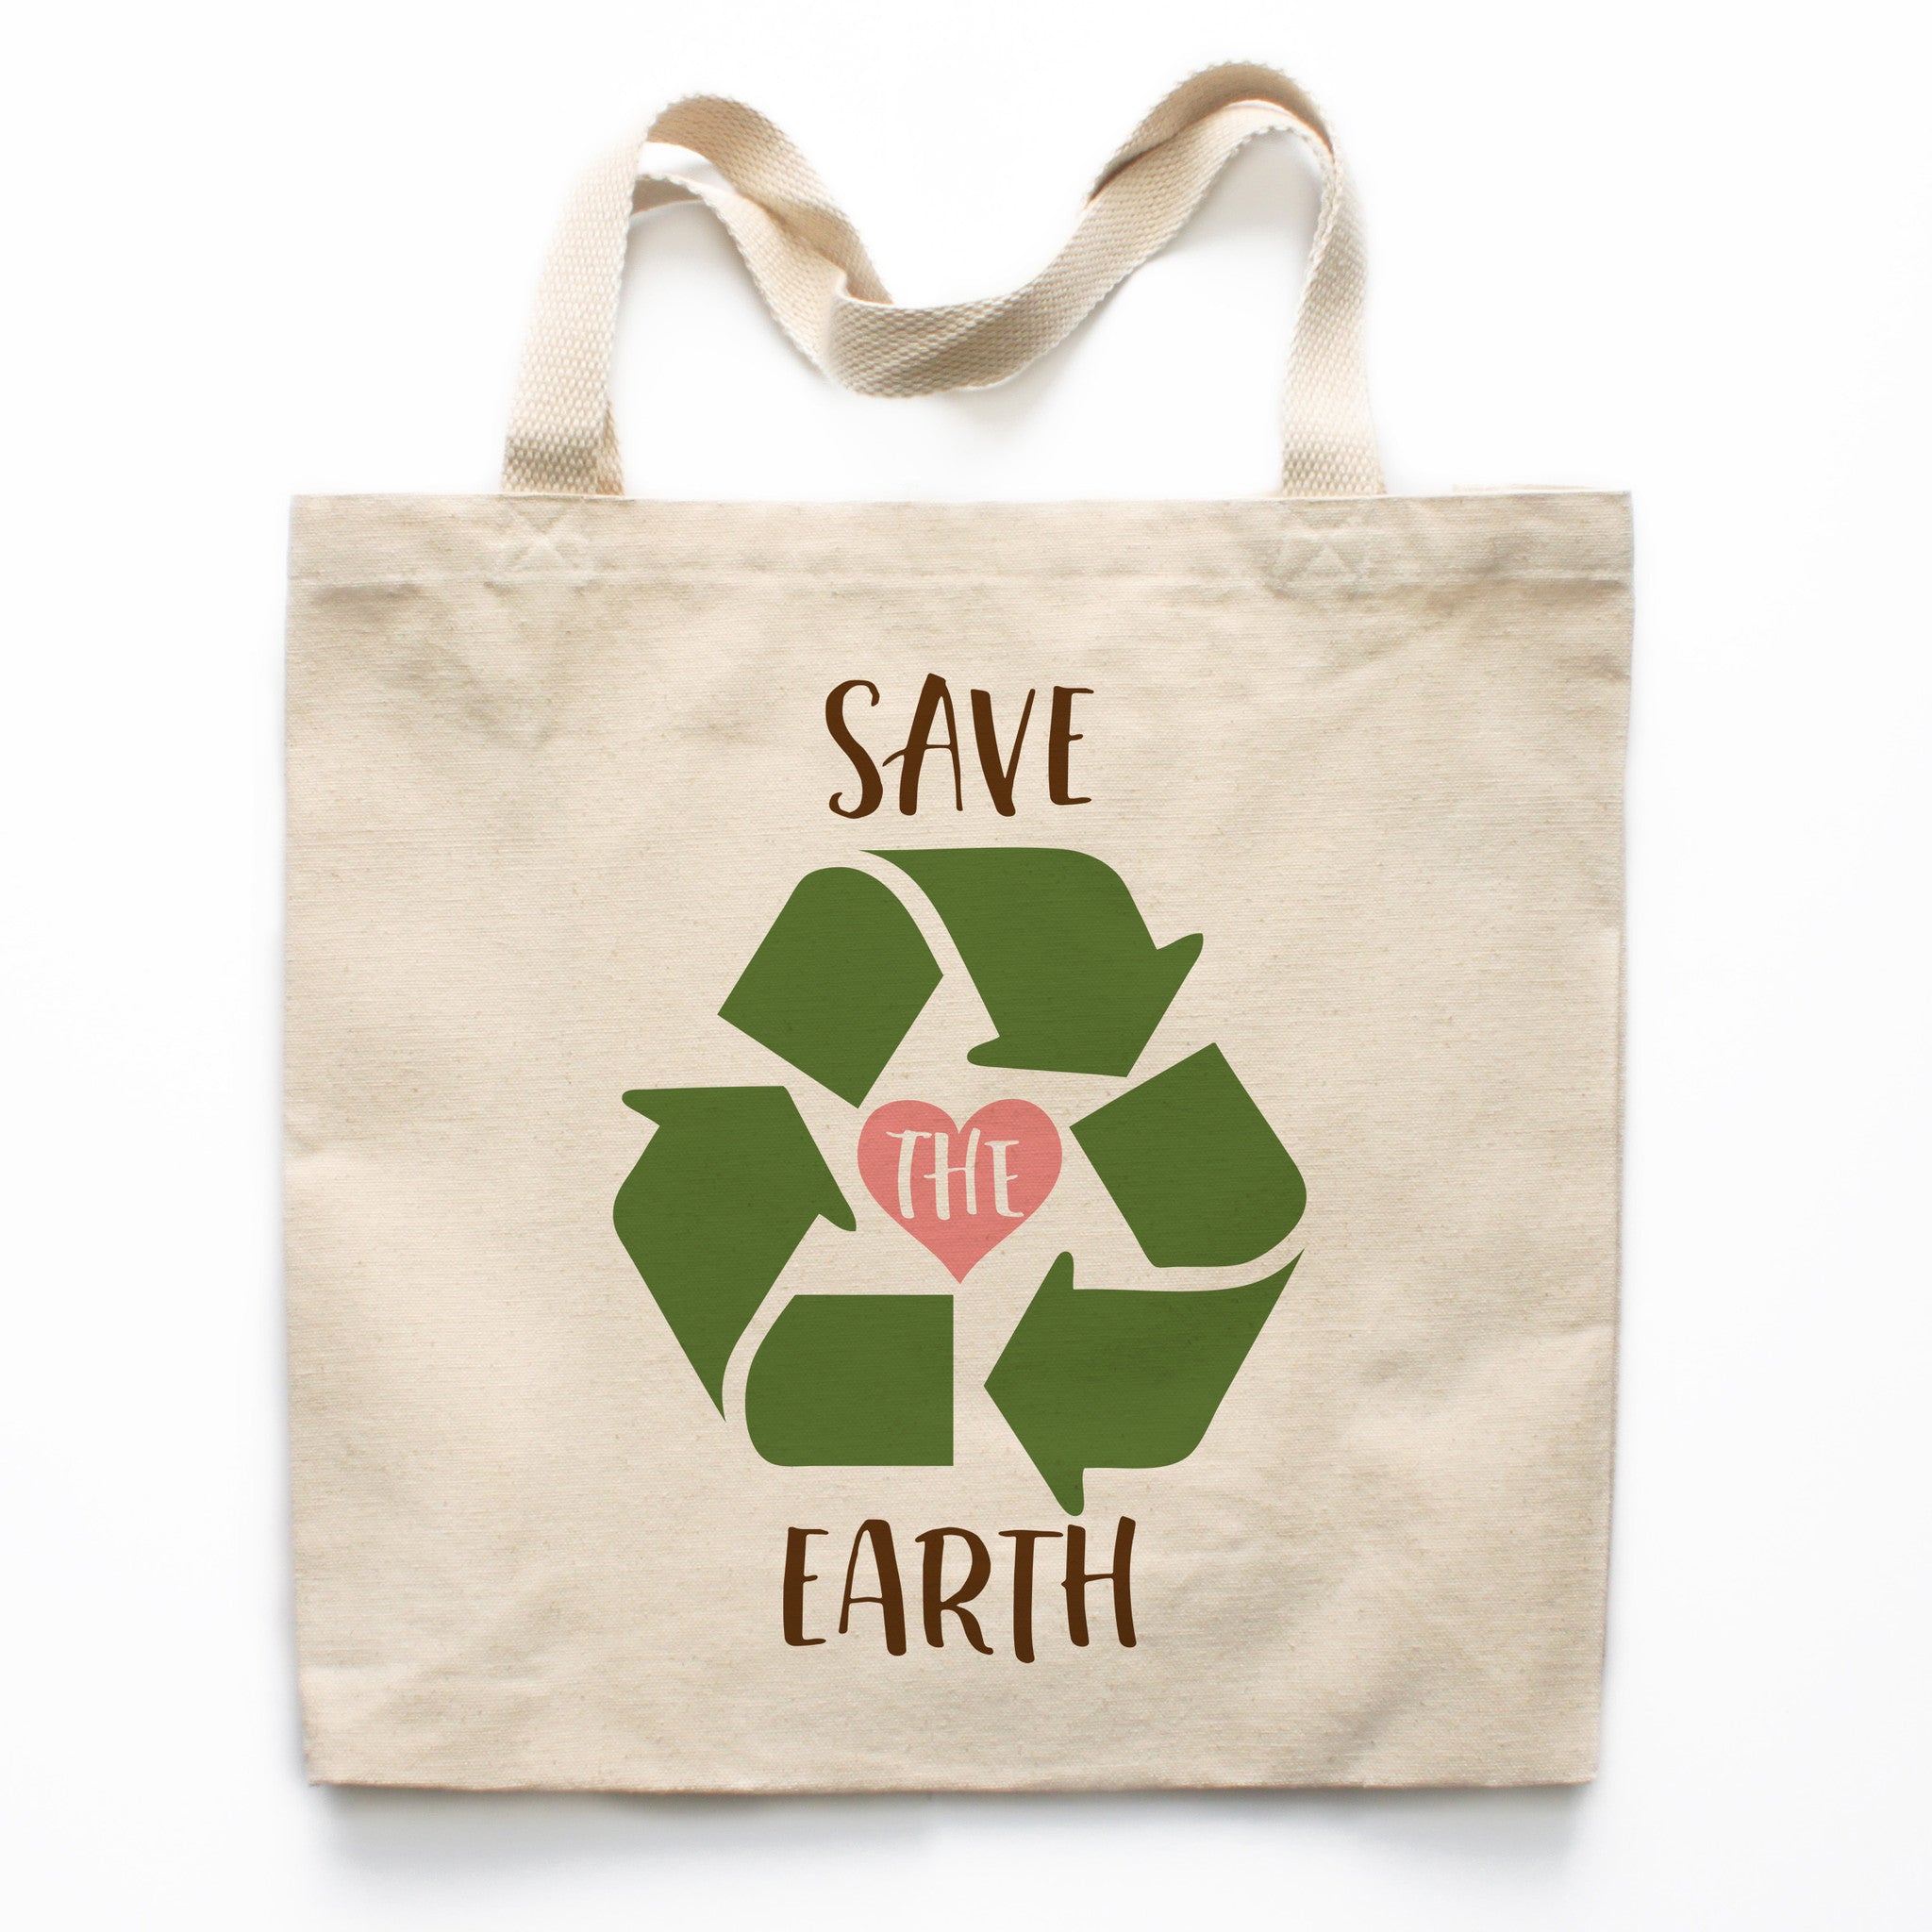 Earthsave Green And White Canvas Tote Bag, Size/Dimension: 14w x 16h Inch